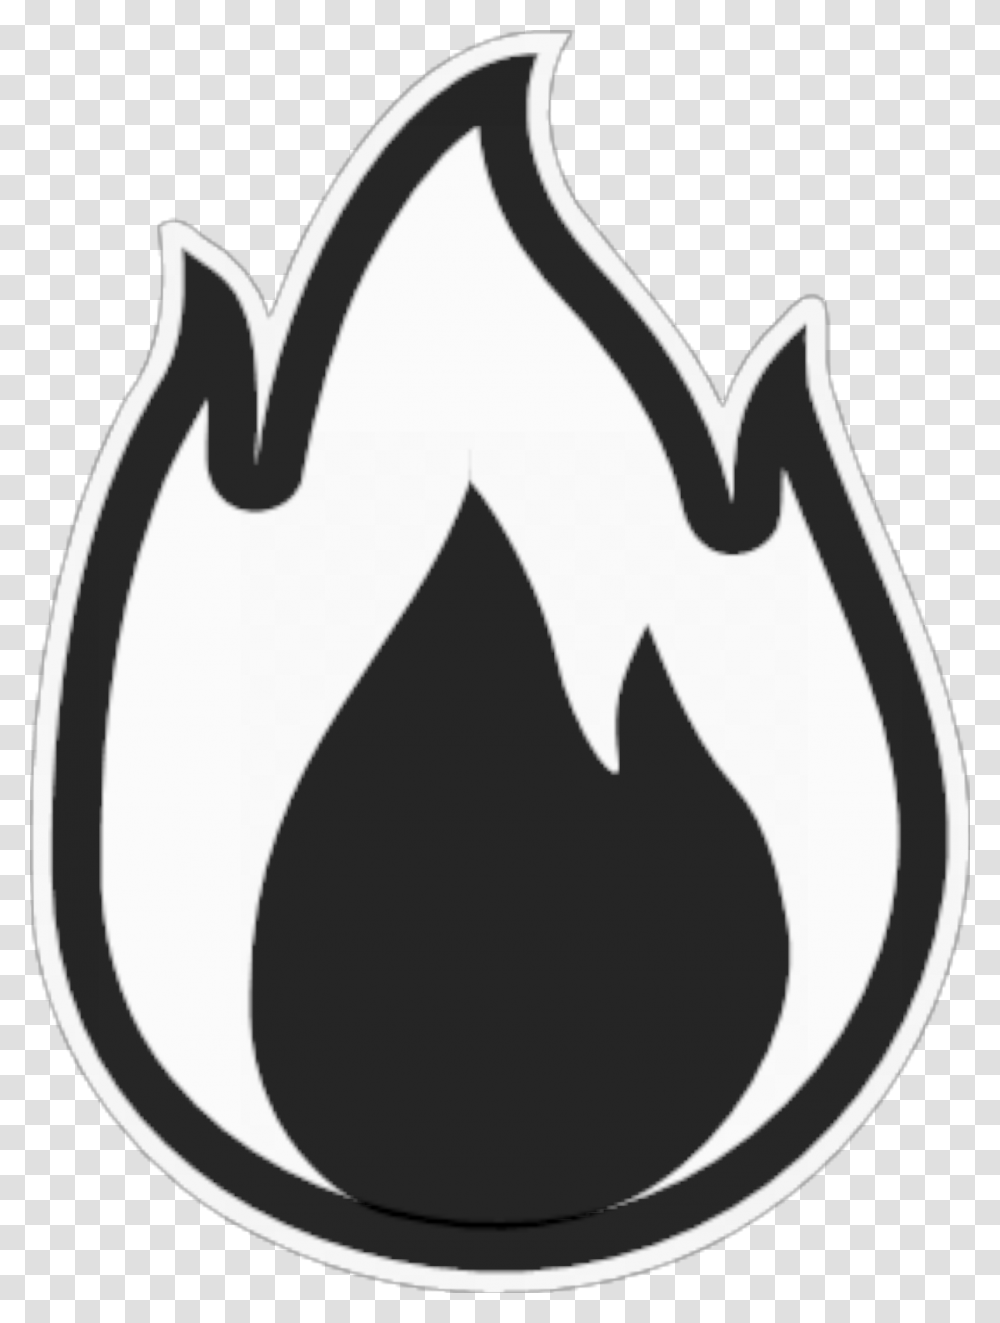 Library Of Campfire Black And White Vector Royalty Free Fire Clip Art Black And White, Symbol, Stencil, Emblem, Text Transparent Png